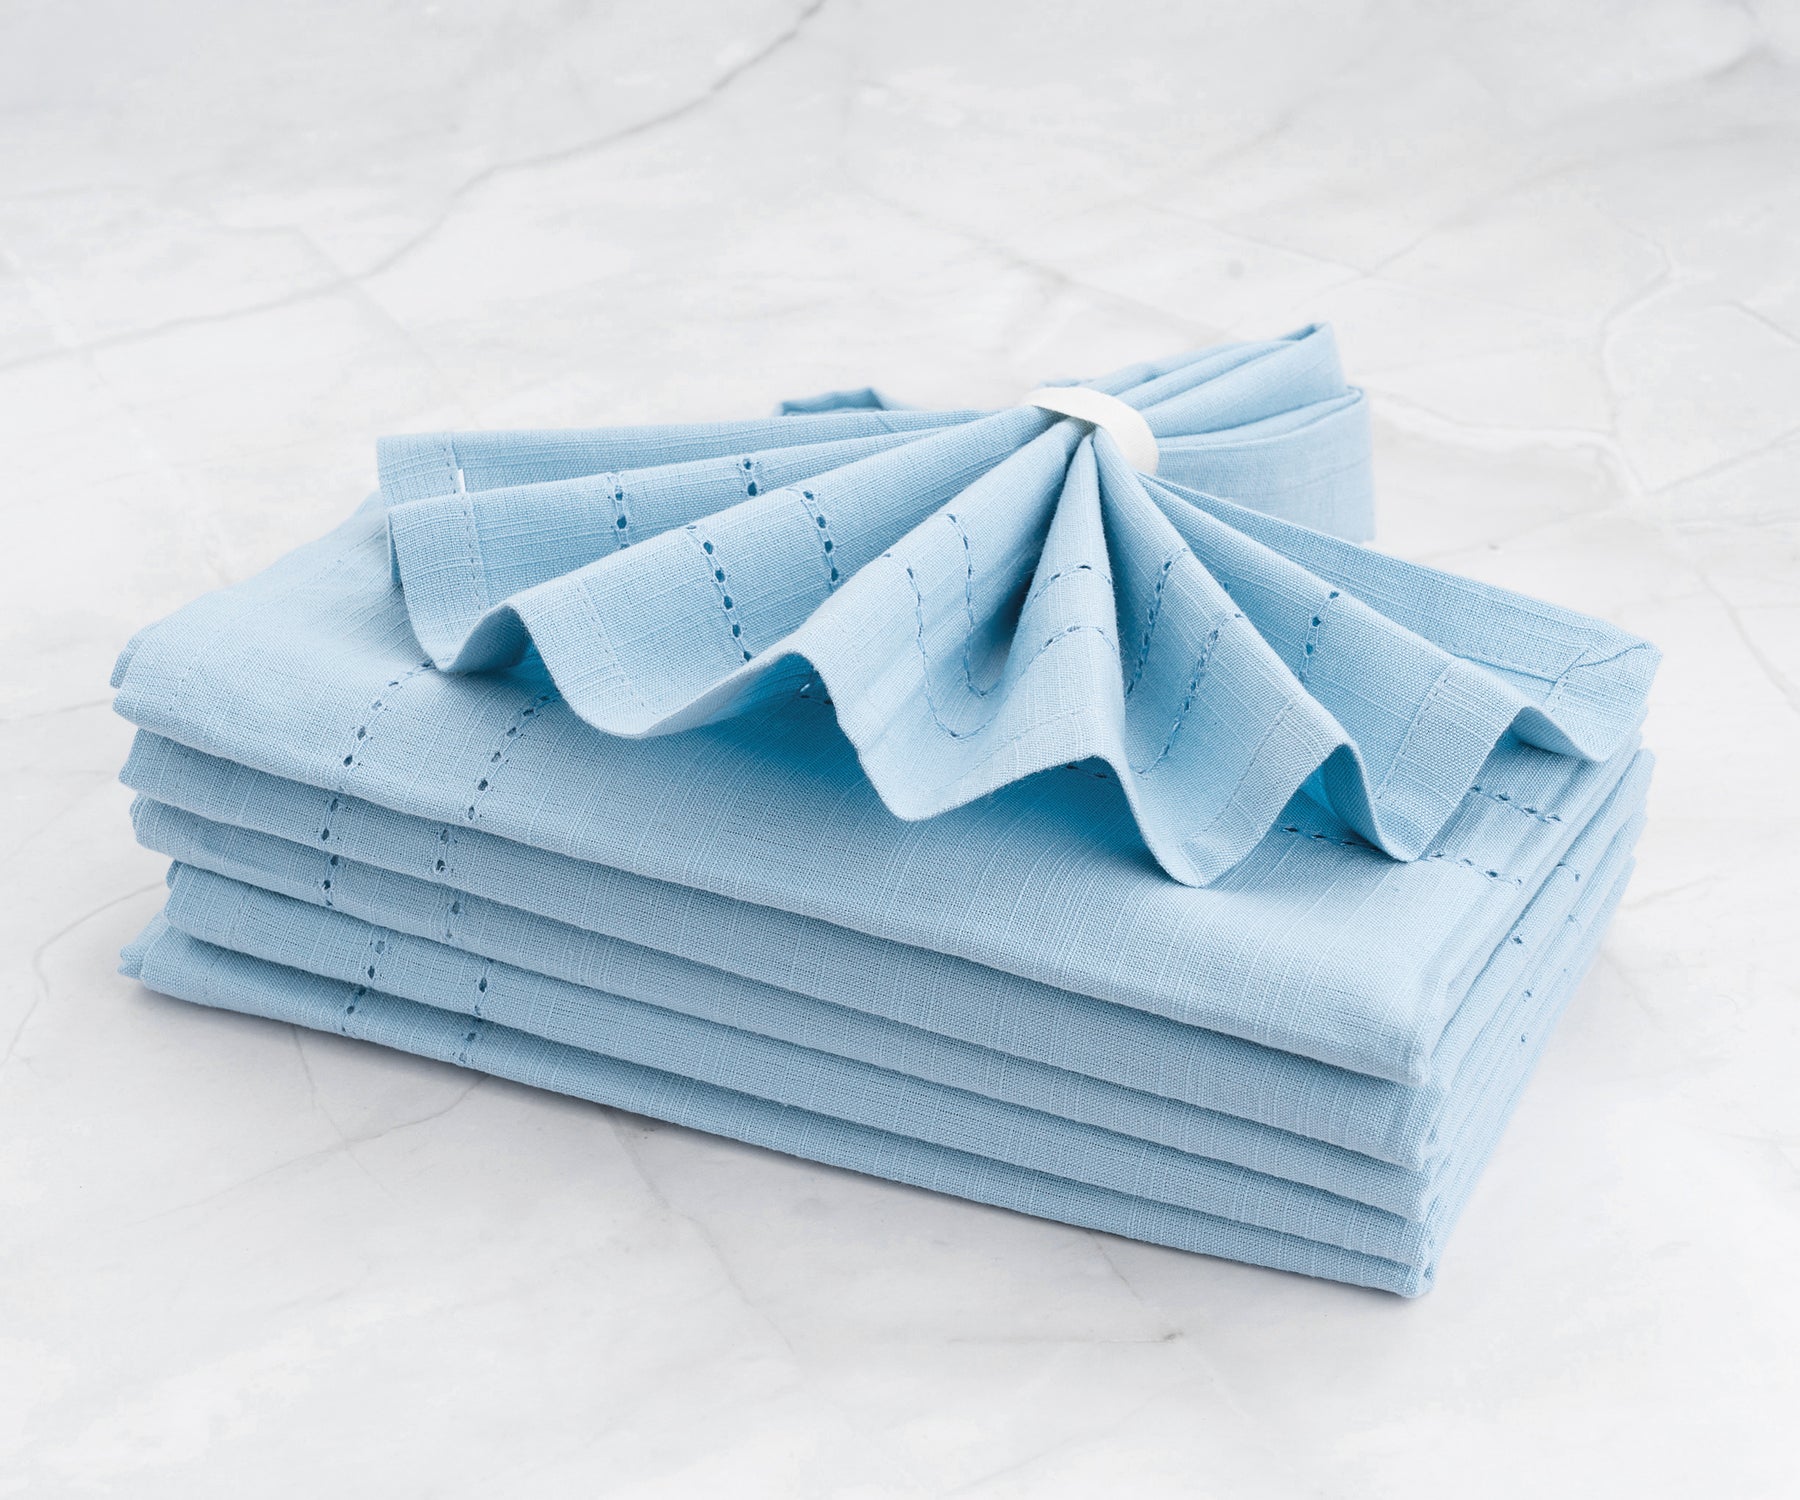 Neatly stacked Cloth Dinner Napkins in blue on a polished marble countertop